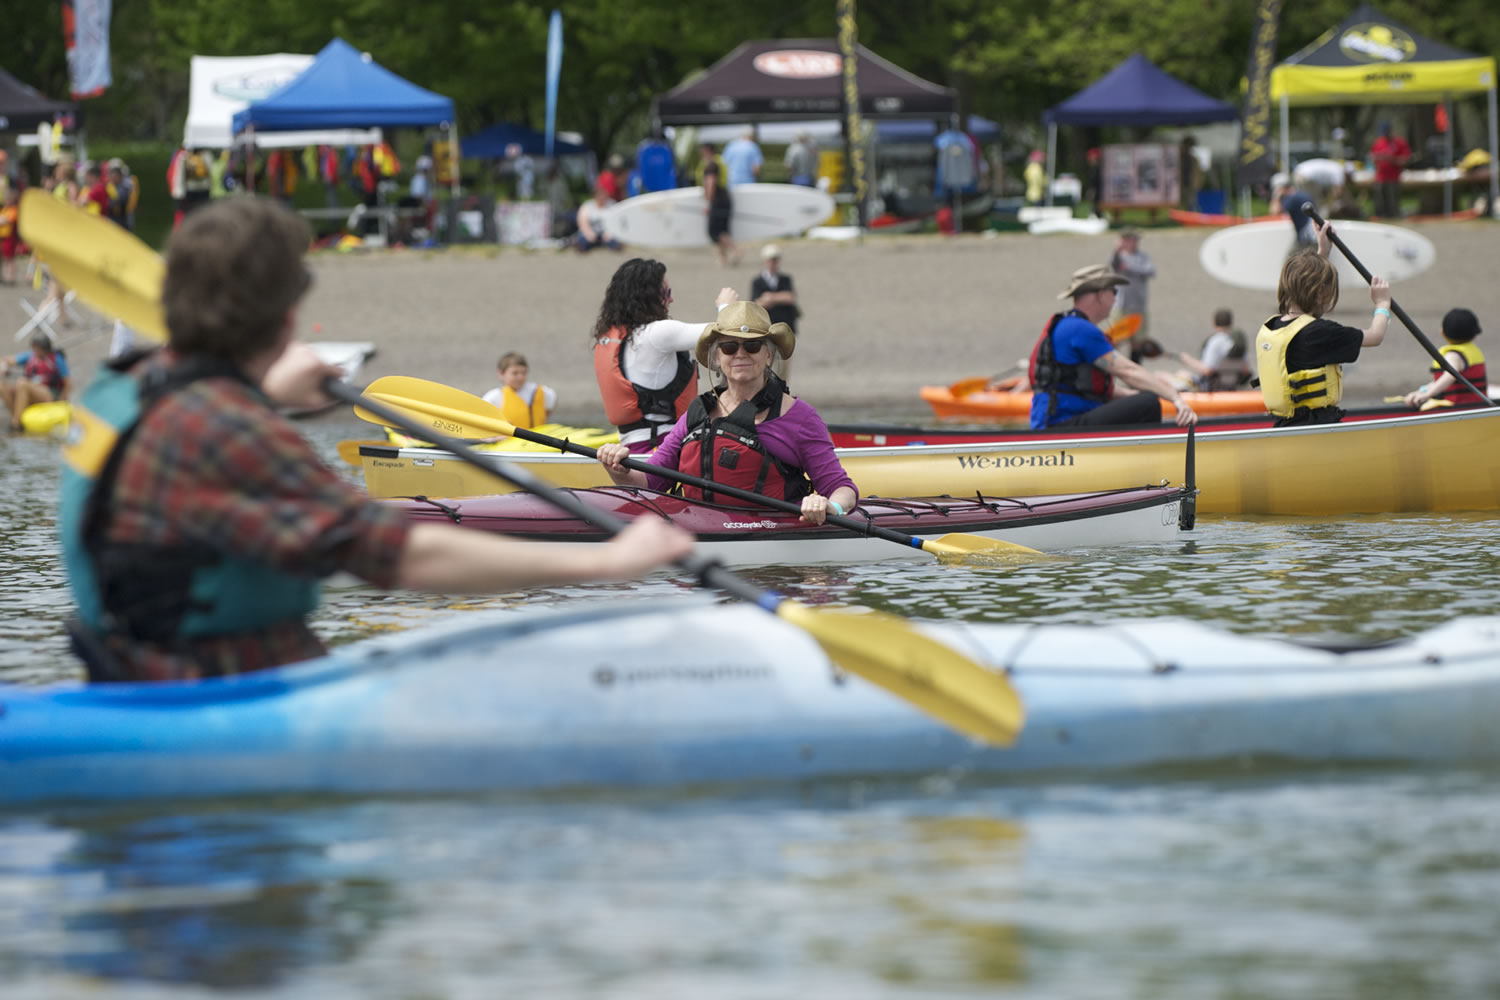 More than 100 boats are available for people to try at the 22nd annual Spring Paddle Festival at Vancouver Lake.